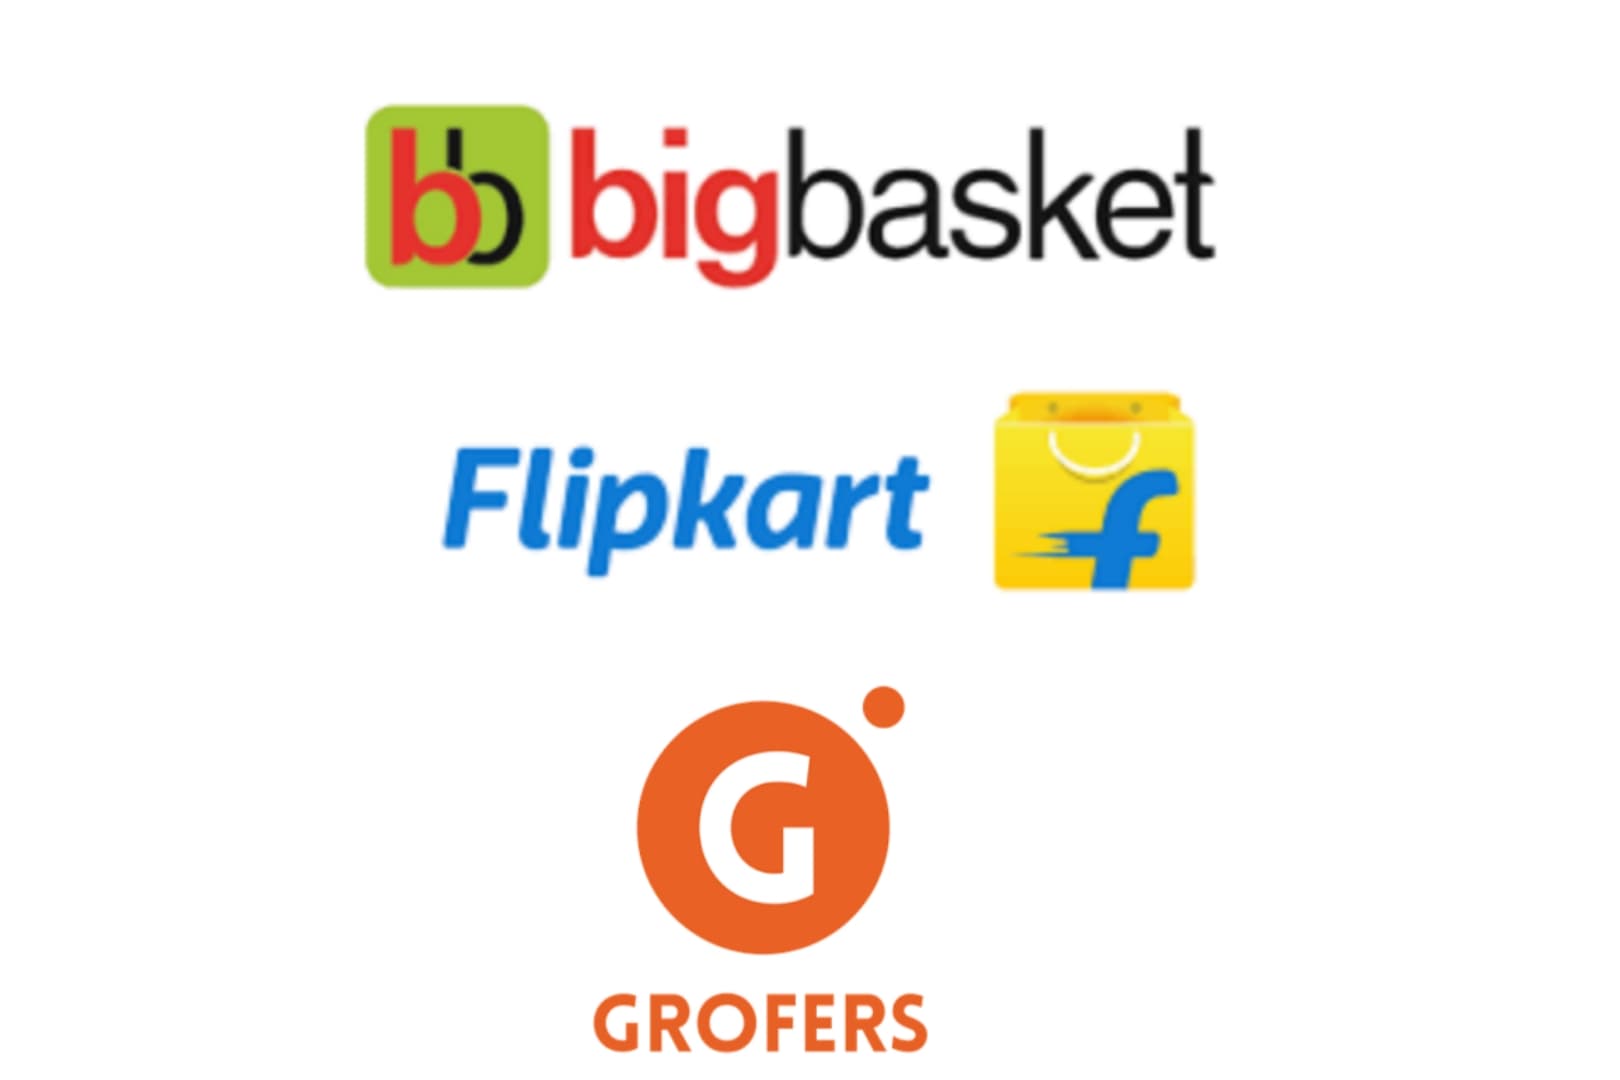 Flipkart, Groffers, and BigBasket are back to their Online Services